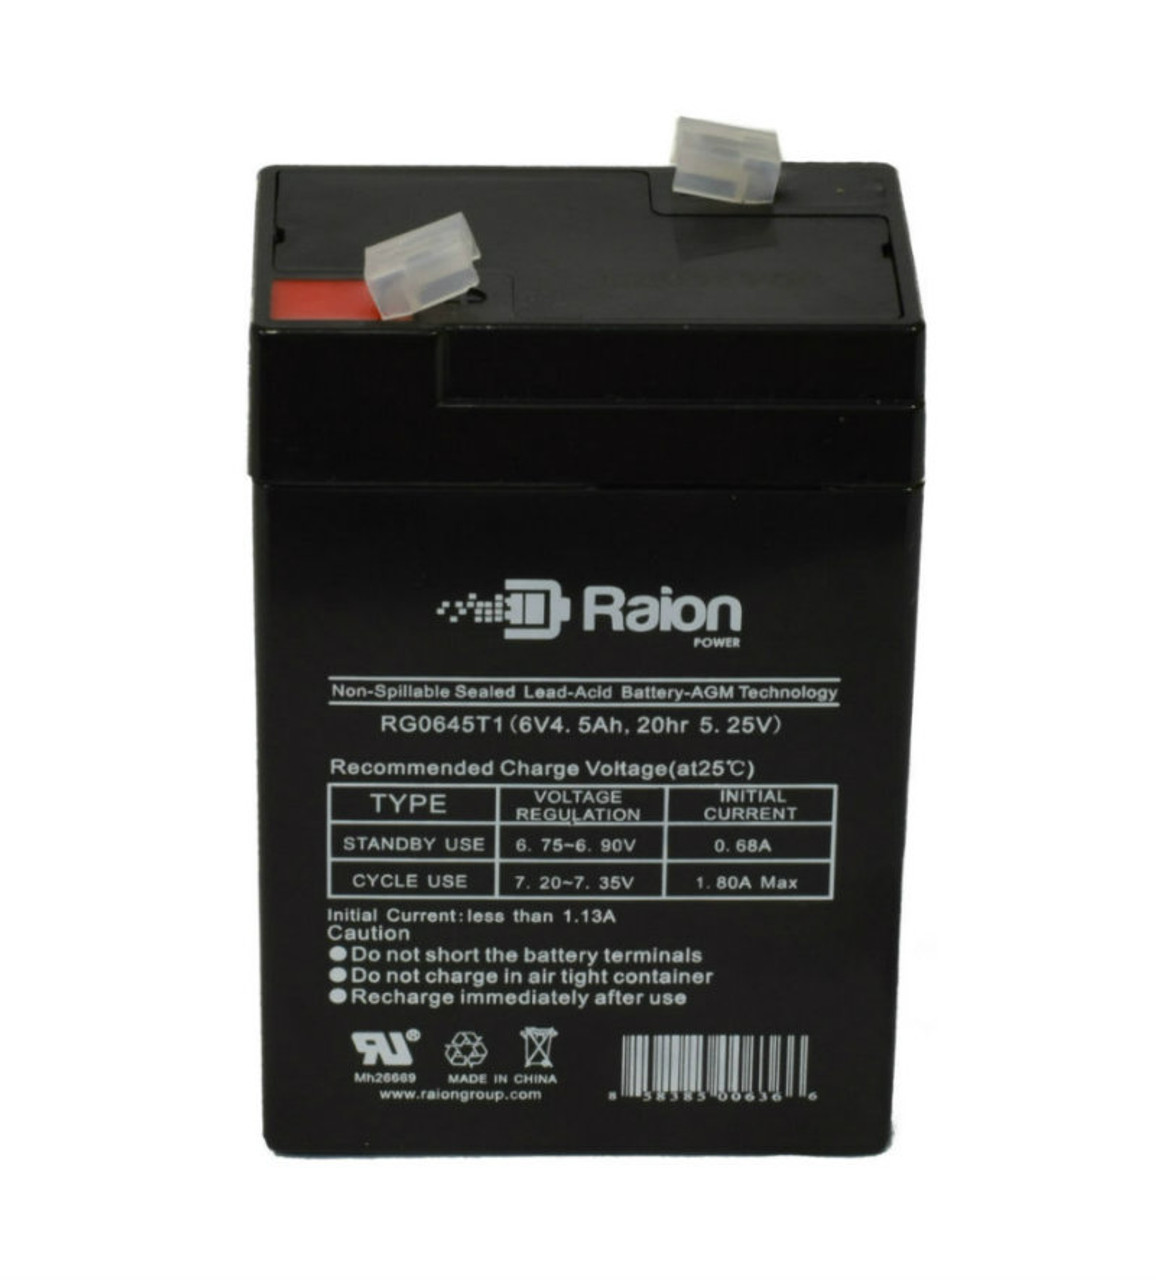 Raion Power RG0645T1 Replacement Battery Cartridge for FengSheng FS6-4